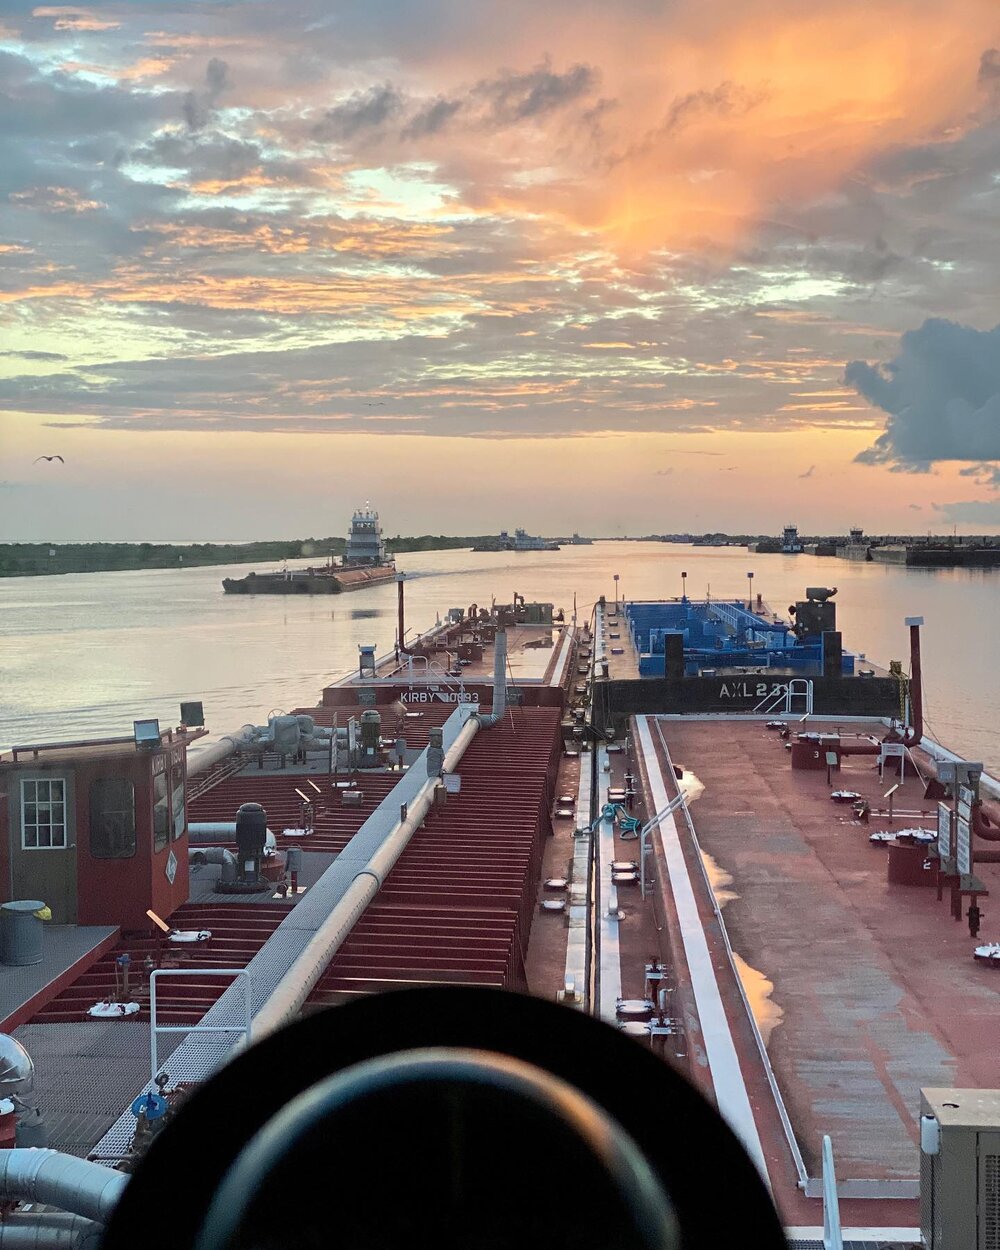 An amazing view for the M/V Kylie Dupre this morning, not only that beautiful sunrise sky, but meeting the M/V Ambrie too!
Always great to these stunning views first thing in the morning with their vessel traffic! Gotta few this morning, thinking eve